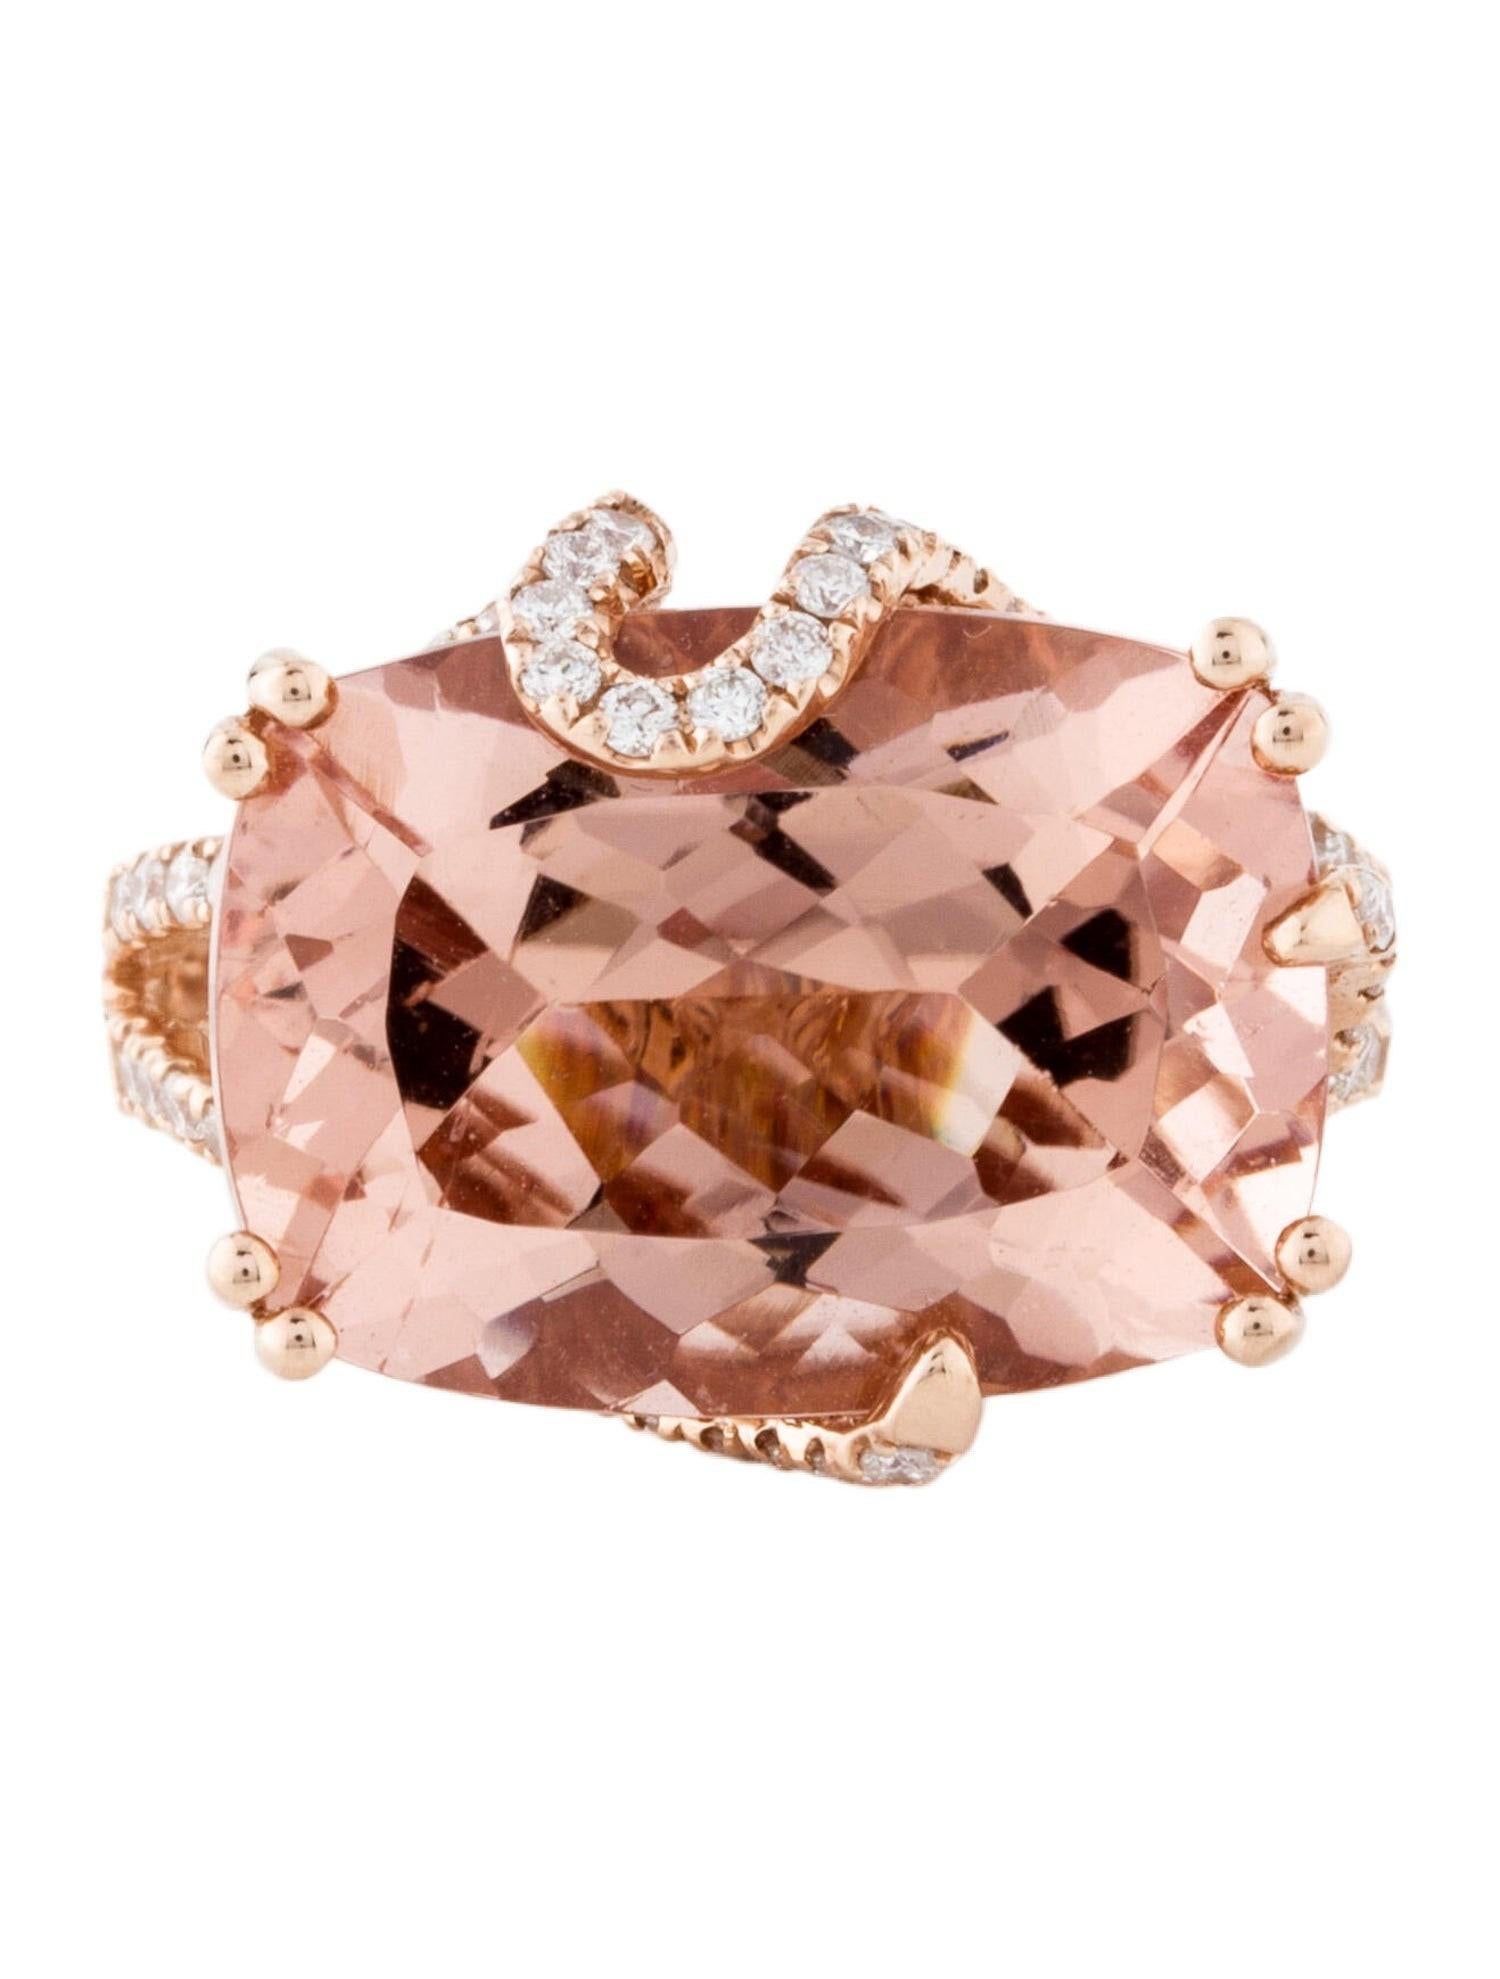 Contemporary The Rose Gold 12.3 Ct Cushion Morganite Diamond Cocktail Ring For Sale